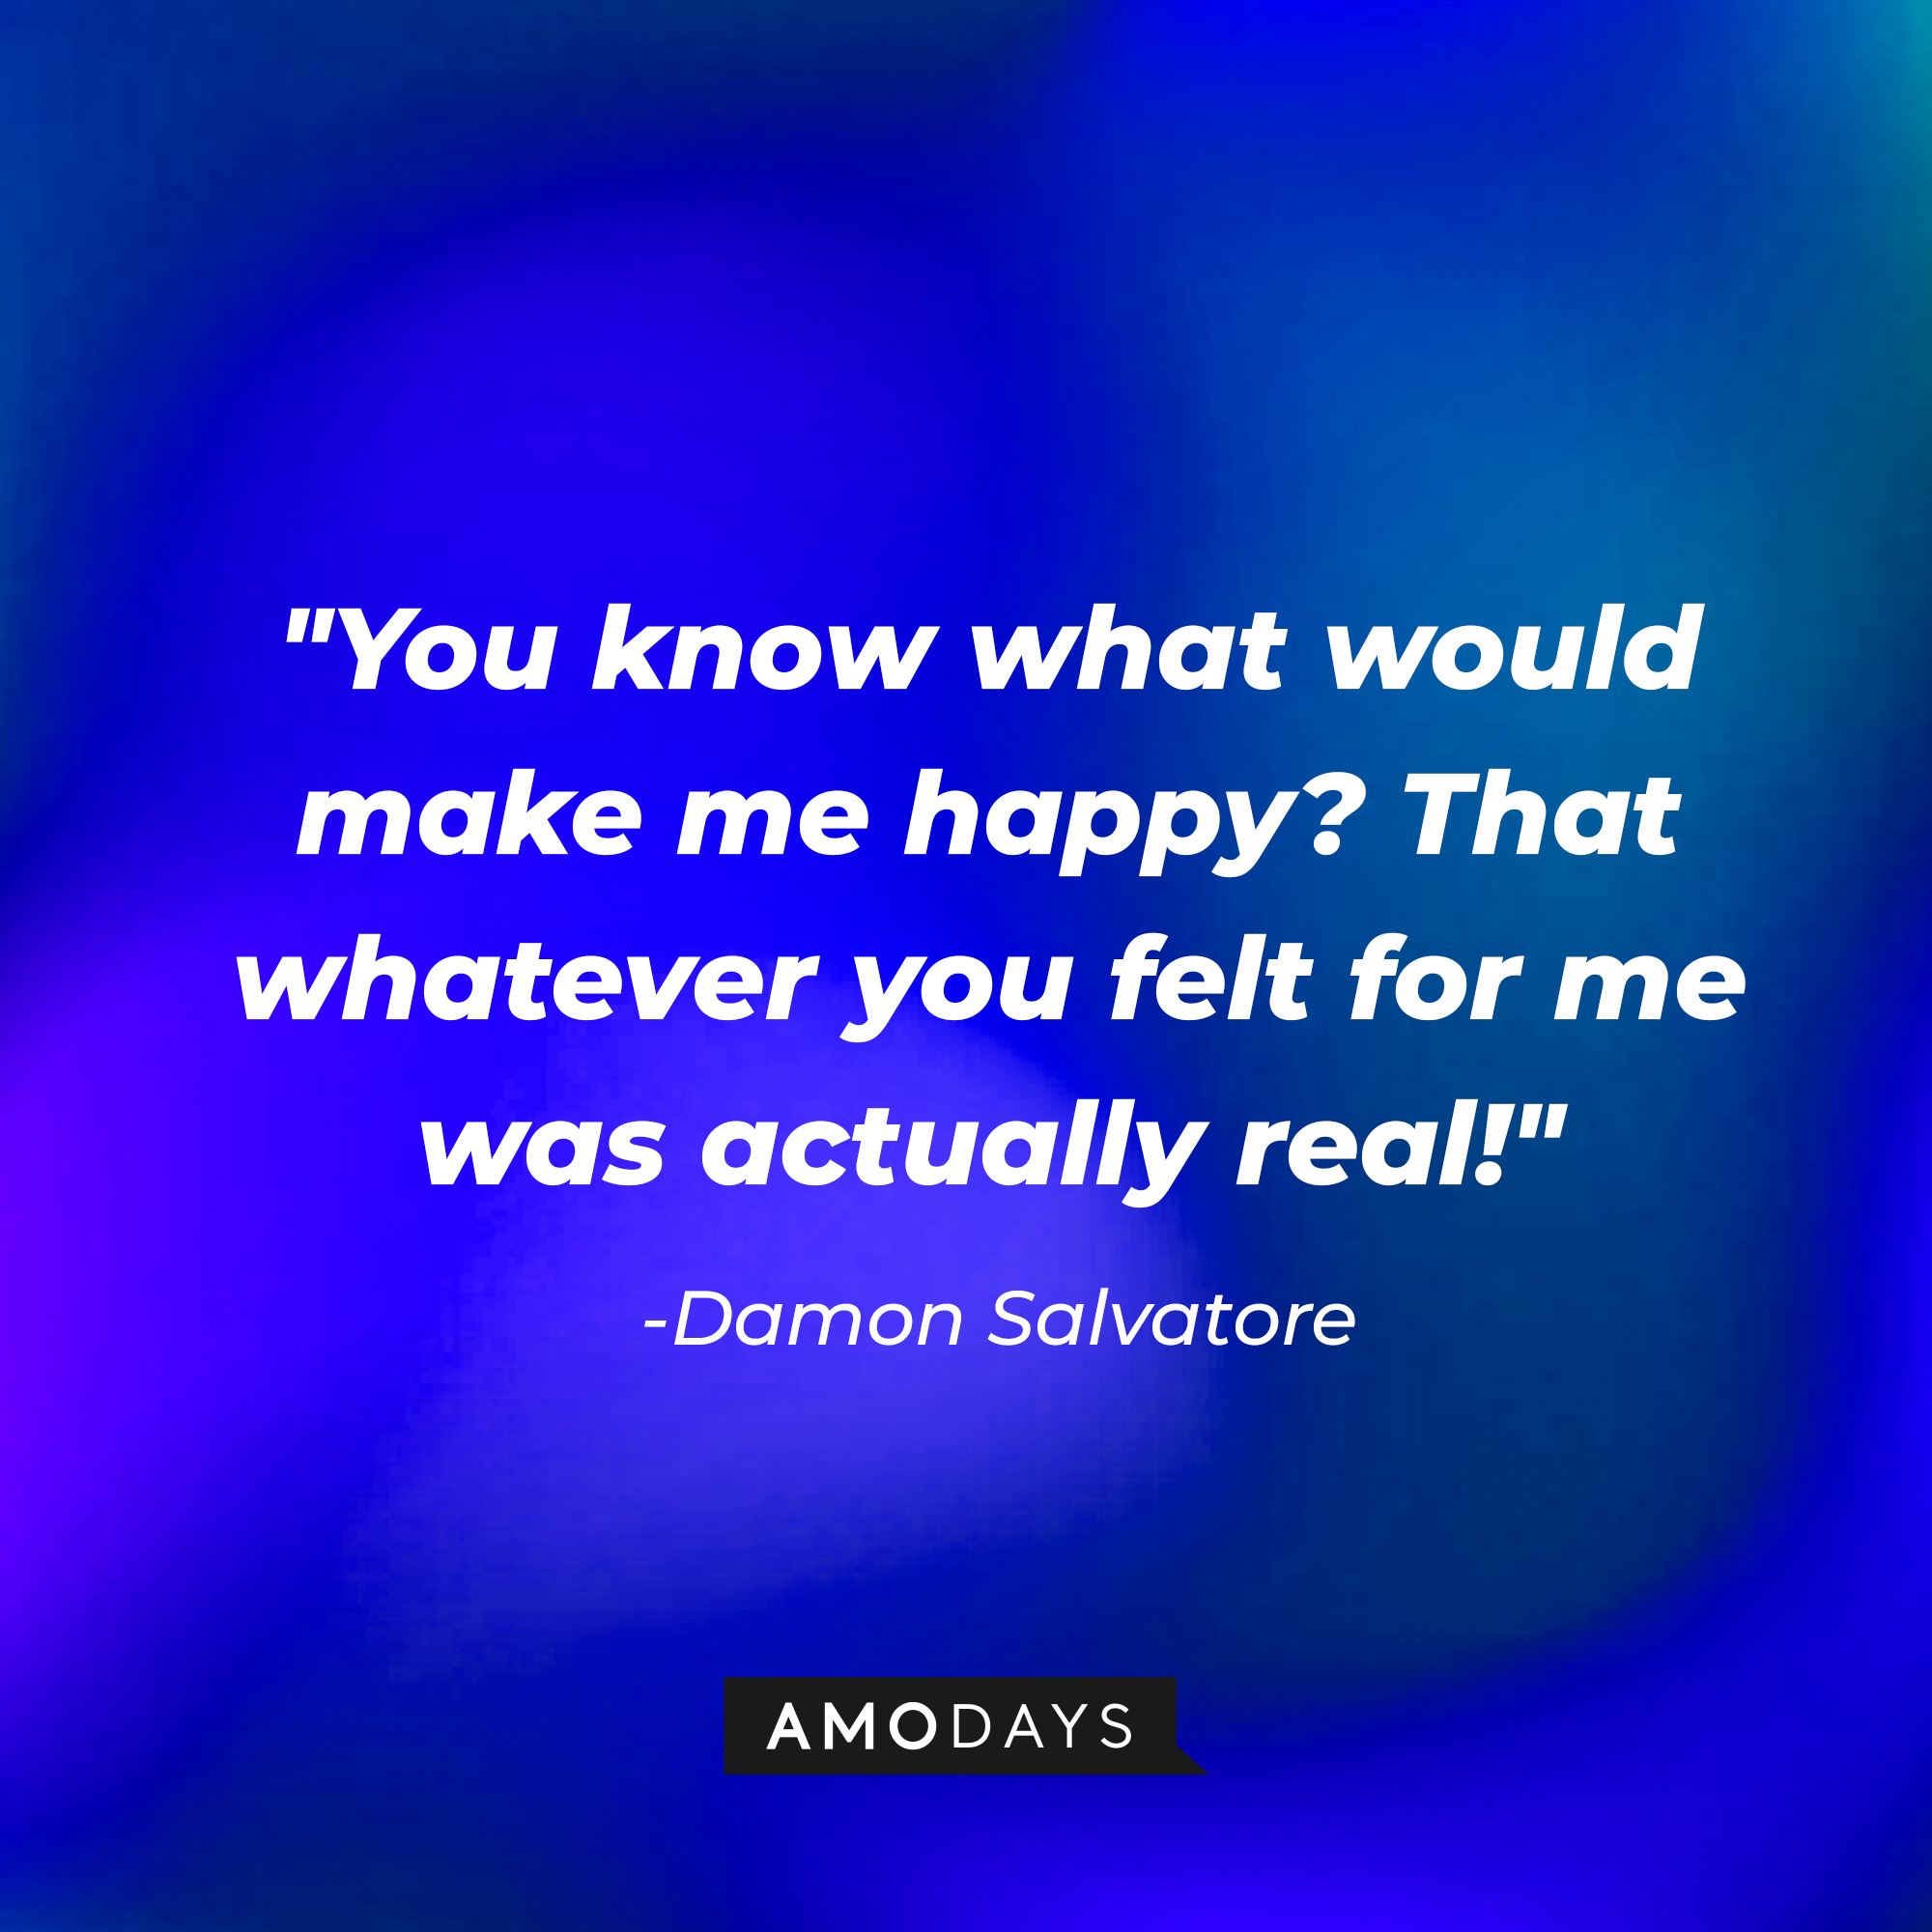 Damon Salvatore's quote: "You know what would make me happy? That whatever you felt for me was actually real!" | Source: AmoDays